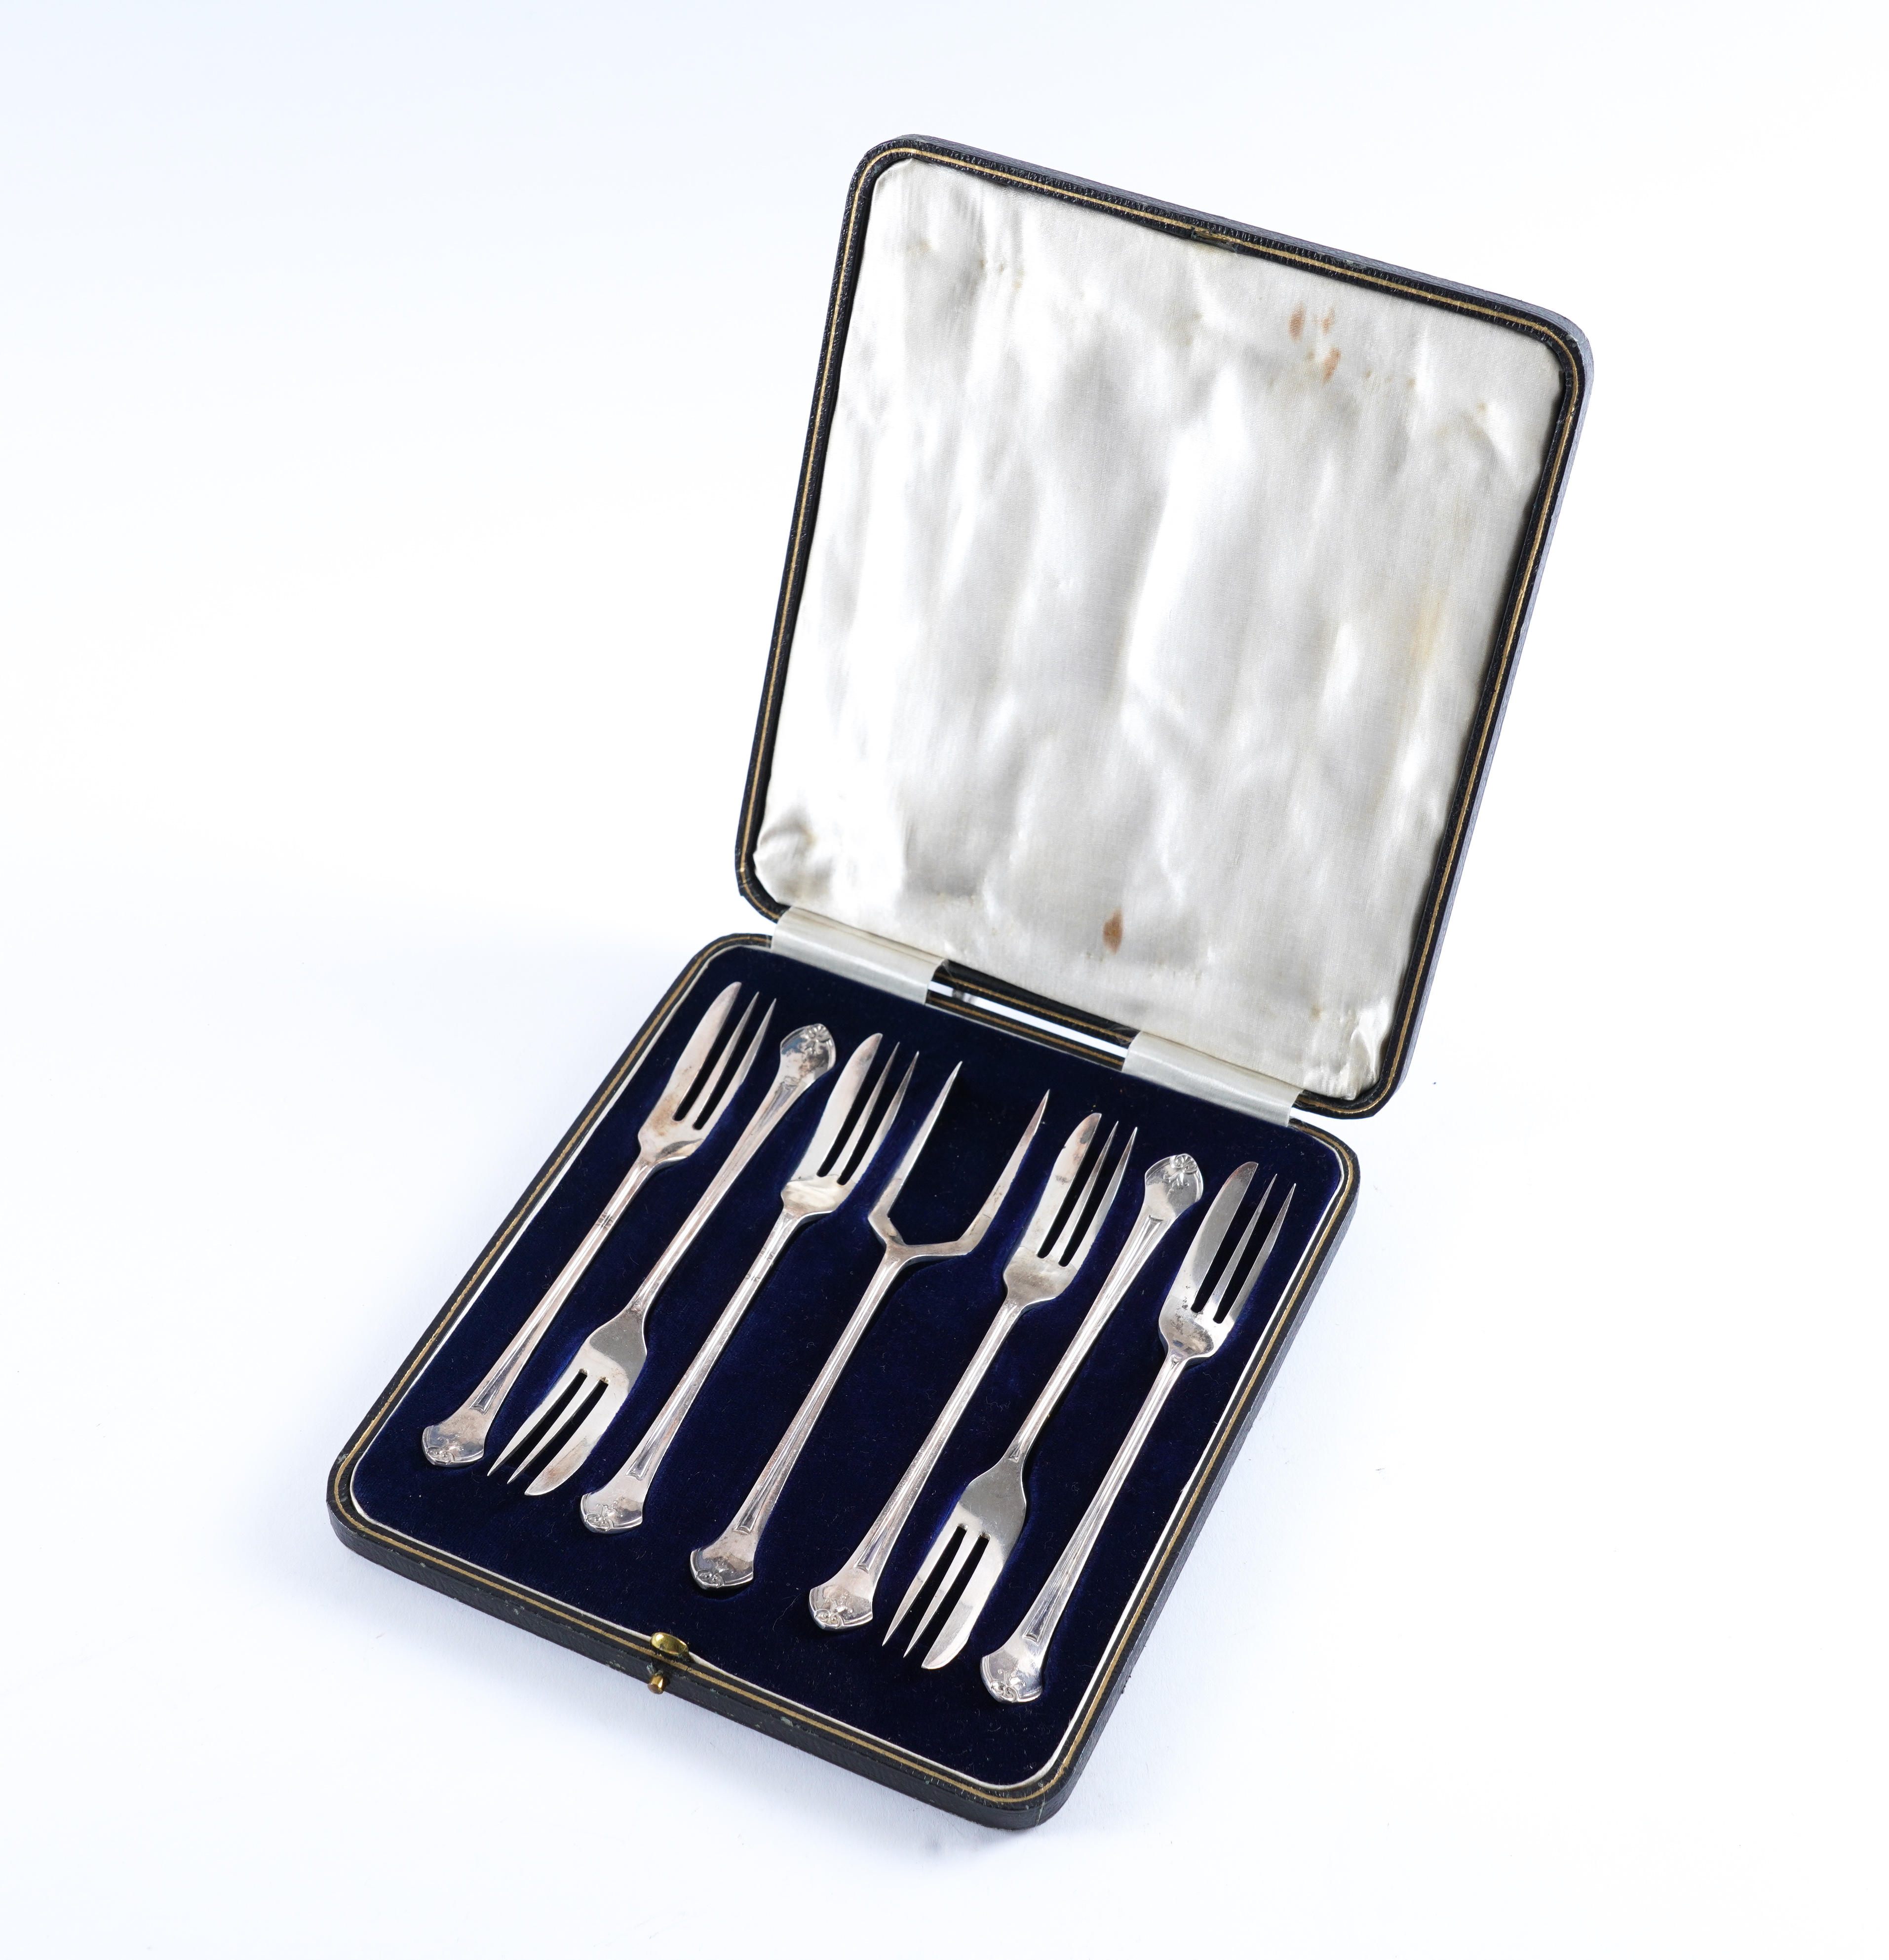 A SET OF SIX SILVER PASTRY FORKS WITH